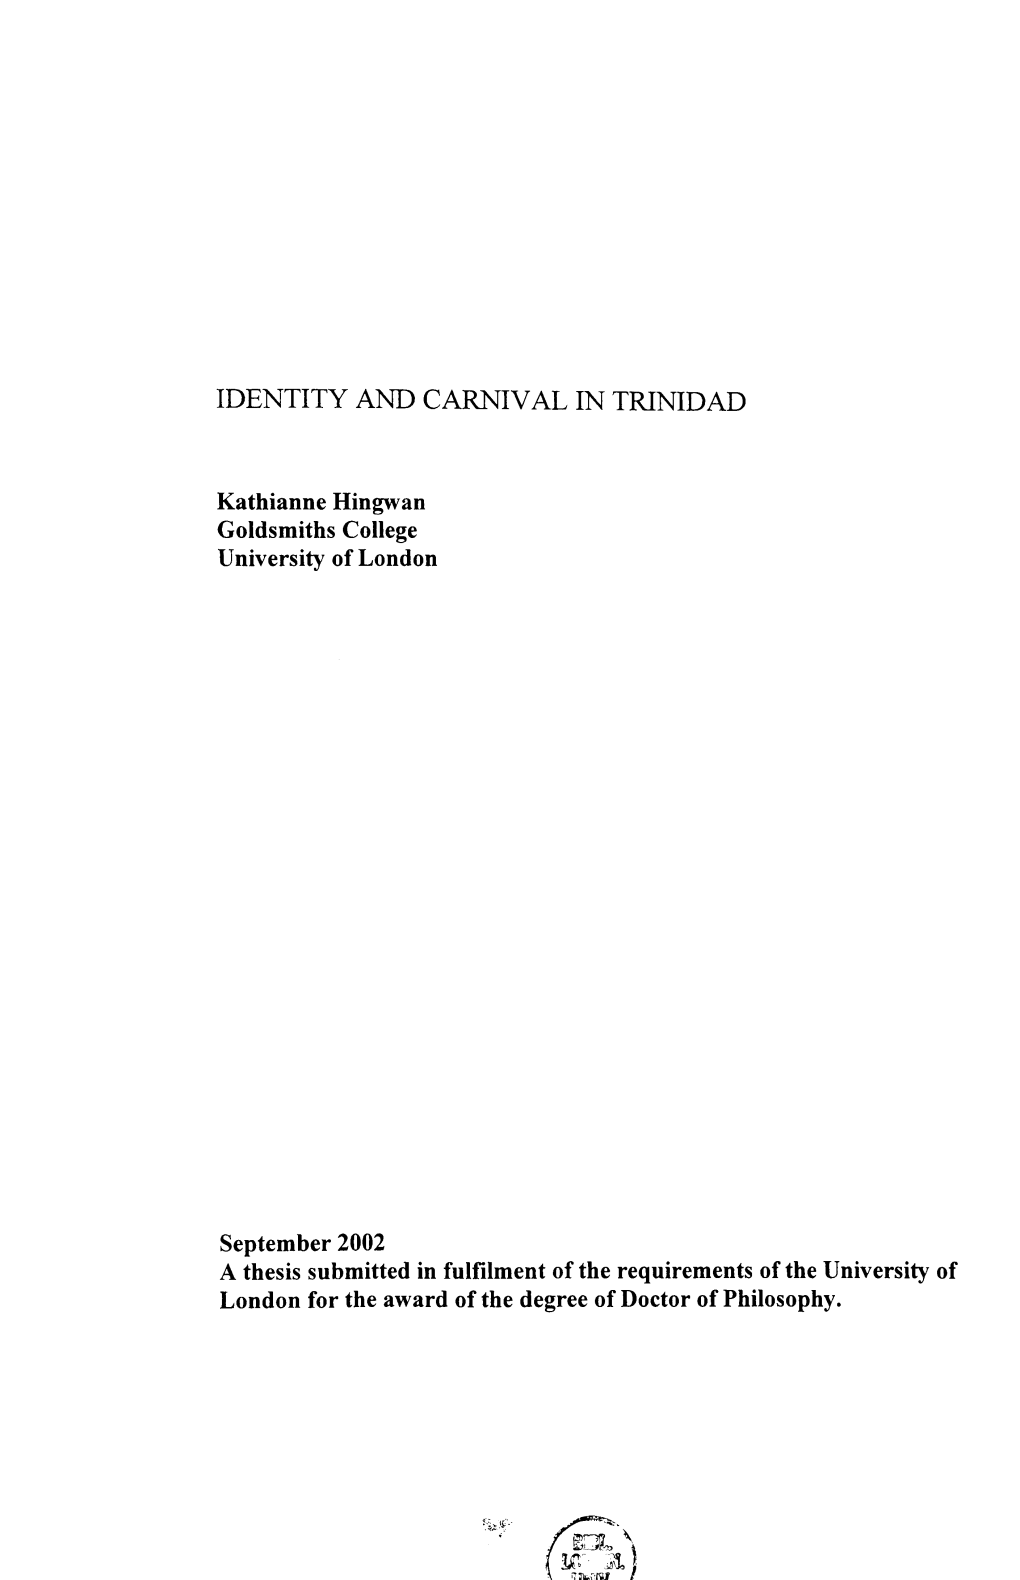 September 2002 a Thesis Submitted in Fulfilment of the Requirements of the University of London for the Award of the Degree of Doctor of Philosophy